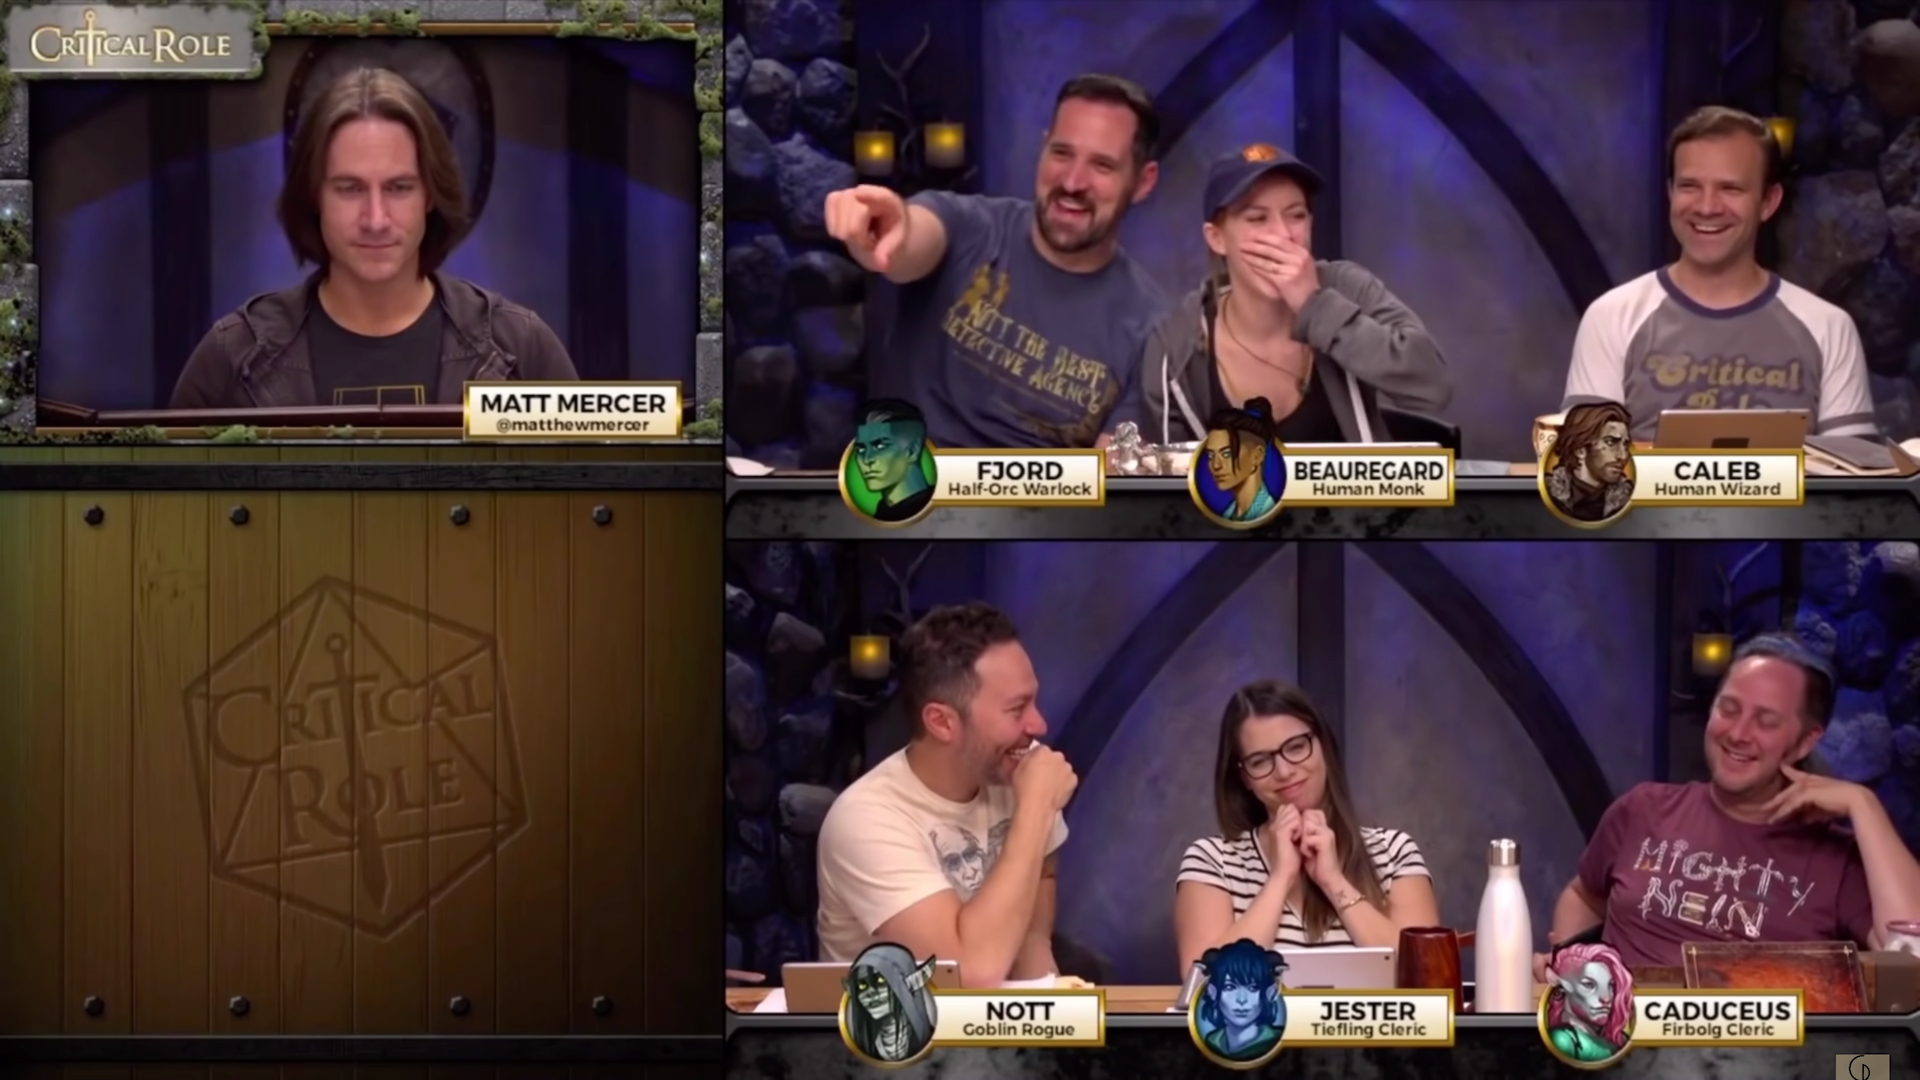 The Critical Role cast react to a joke line that stops DM Matt Mercer in his tracks during an episode of the wildly popular tabletop RPG actual play series.